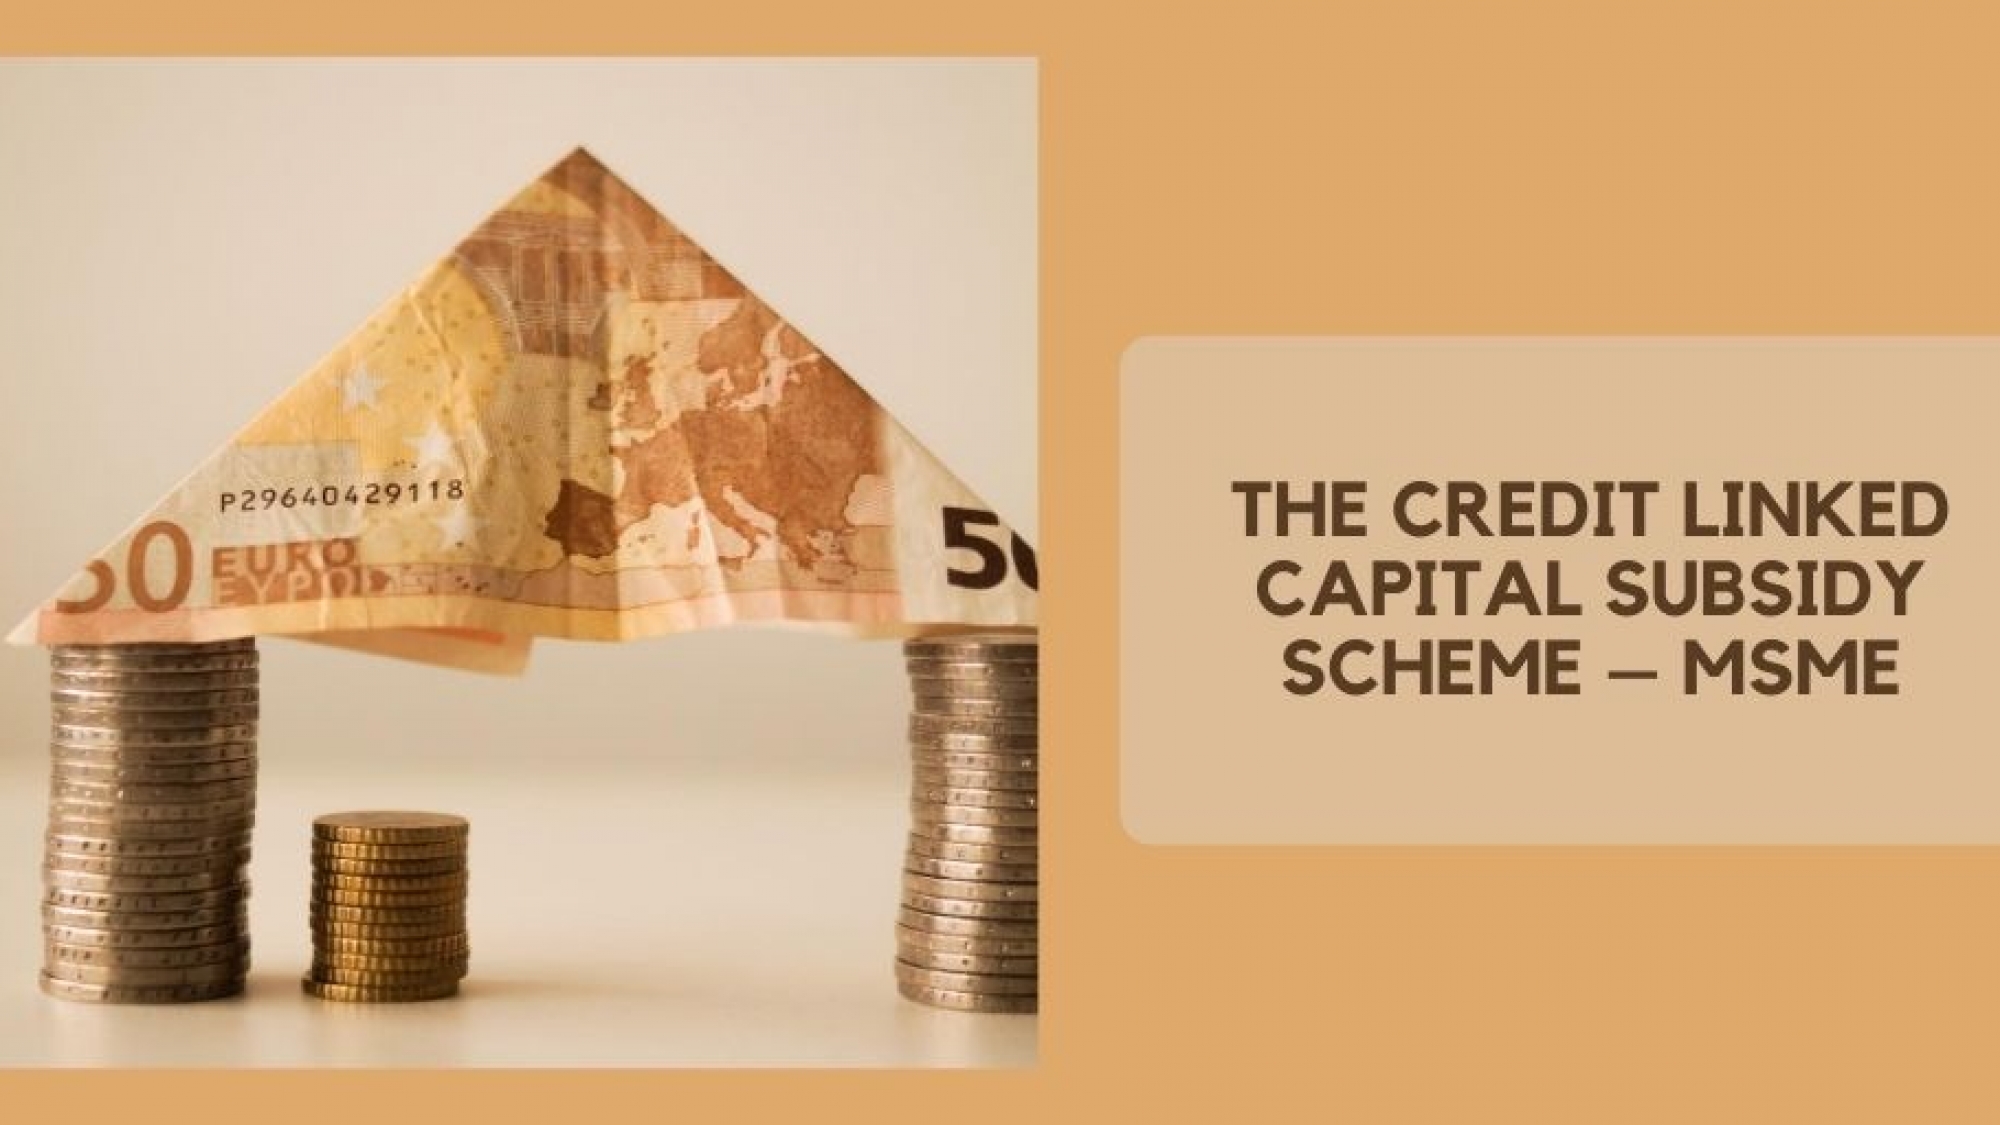 The Credit Linked Capital Subsidy Scheme – MSME